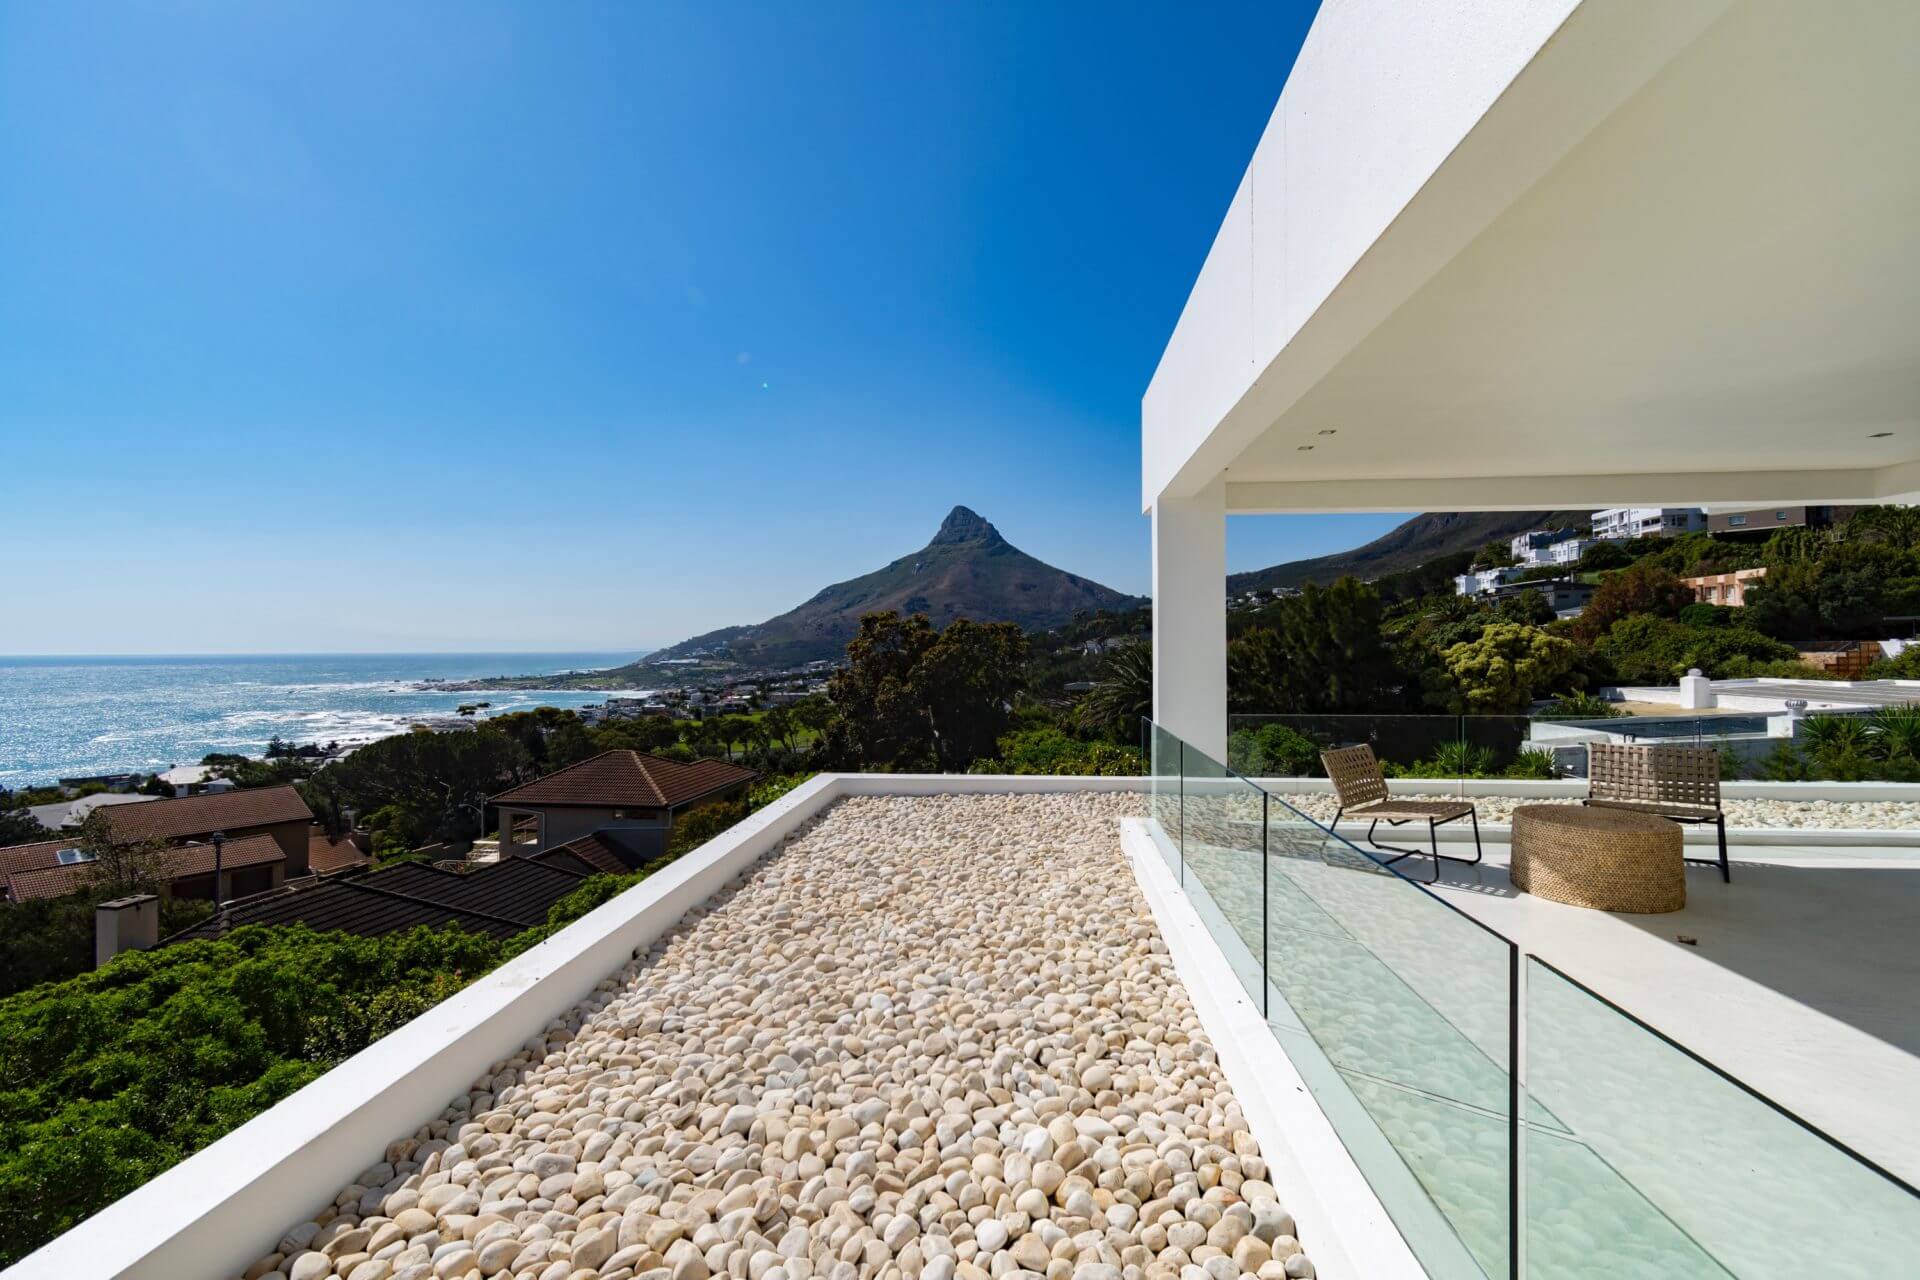 Photo 55 of Villa Ibiza accommodation in Camps Bay, Cape Town with 8 bedrooms and 8 bathrooms